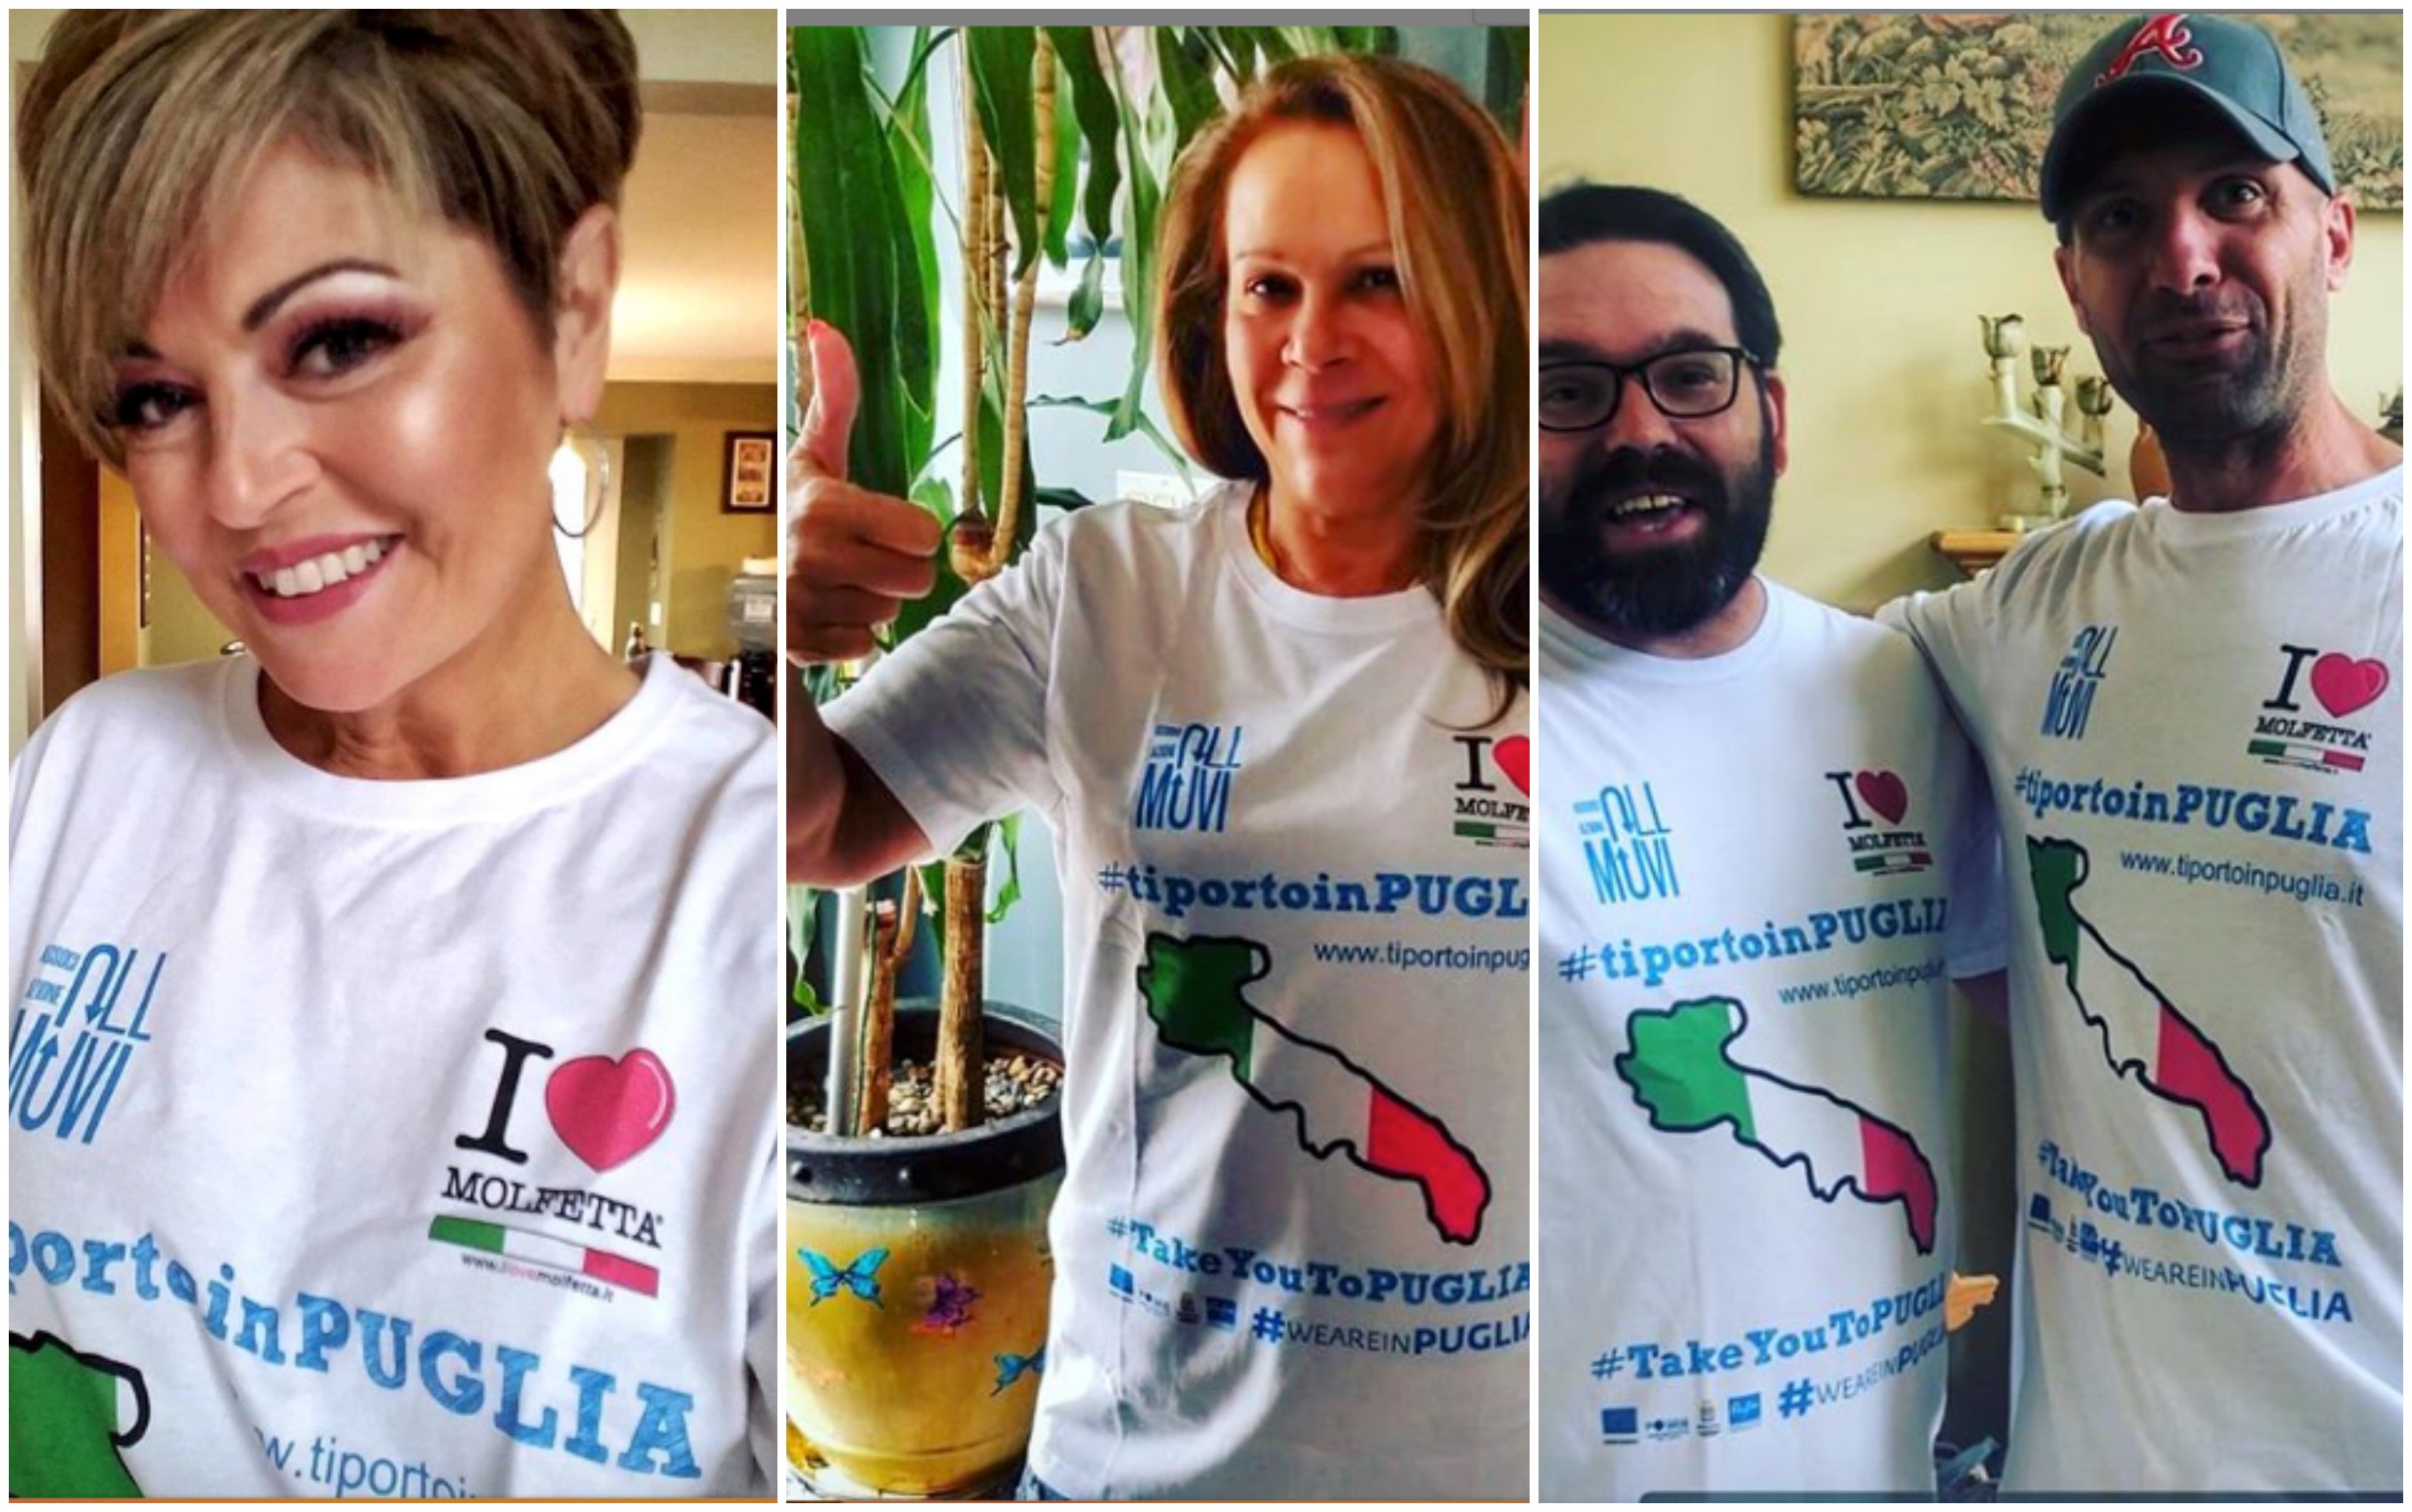 Le t-shirt #tiportoinPUGLIA very cool